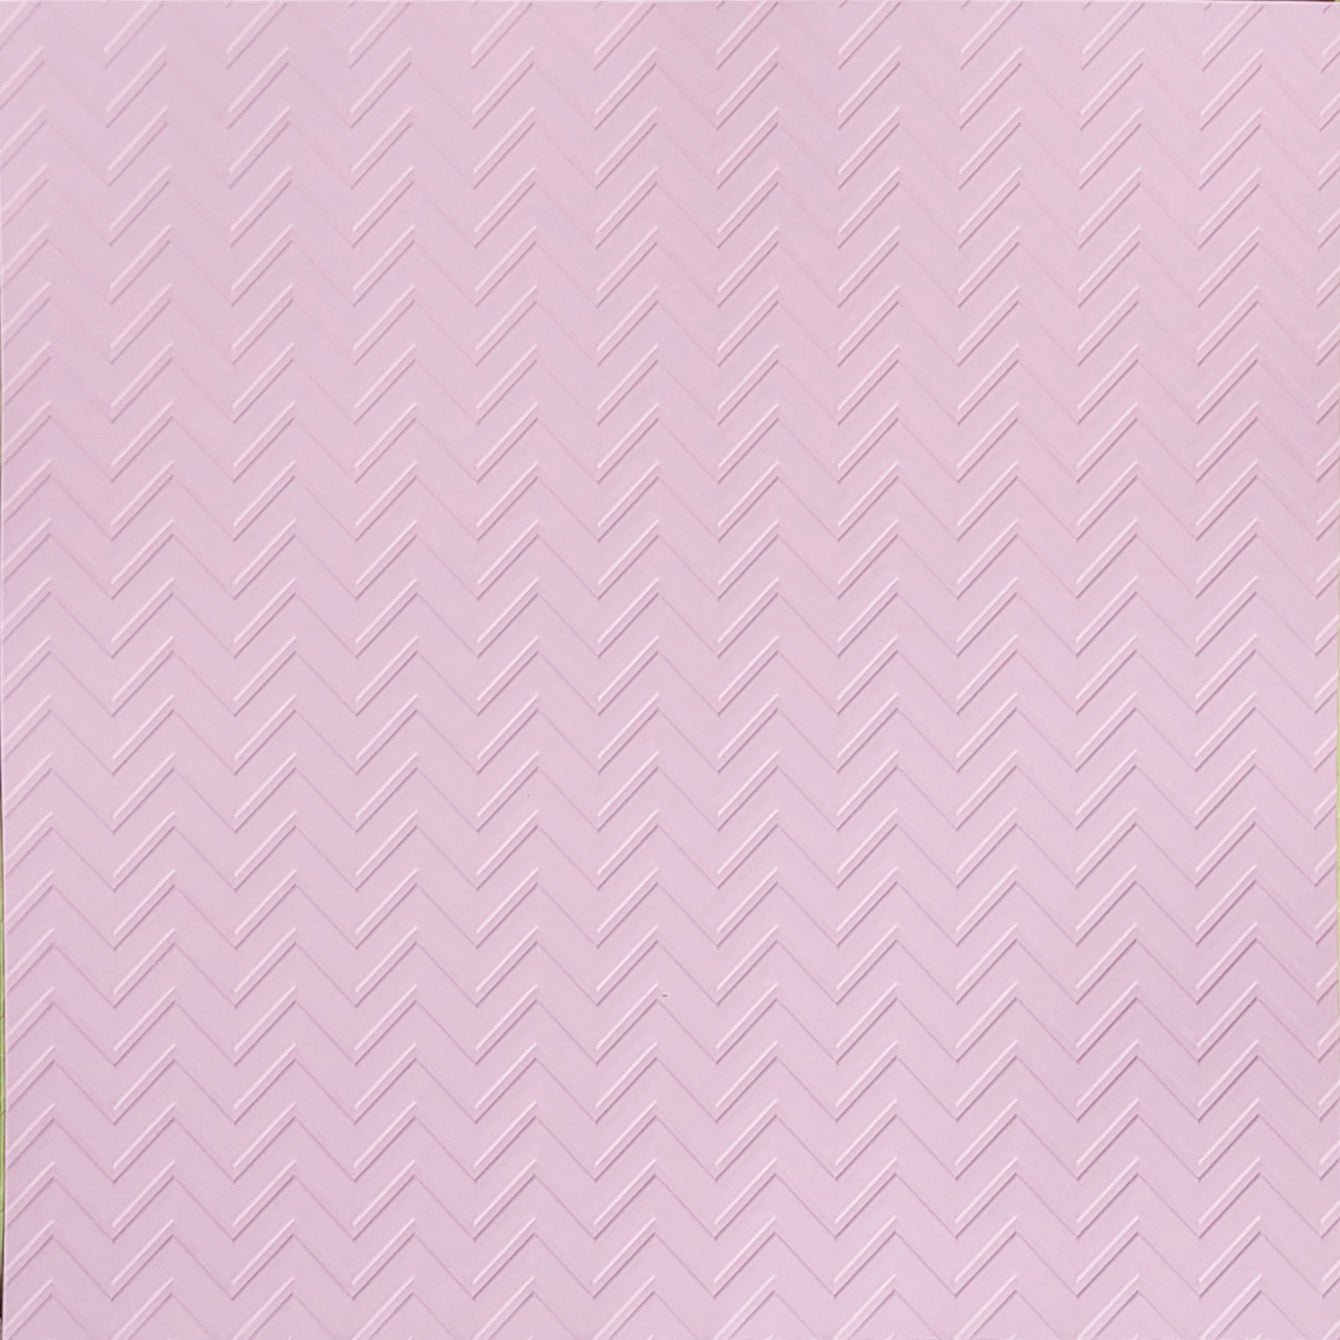 Pink 12x12 cardstock with color-on-color embossed chevron pattern - Recollections Signature Paper